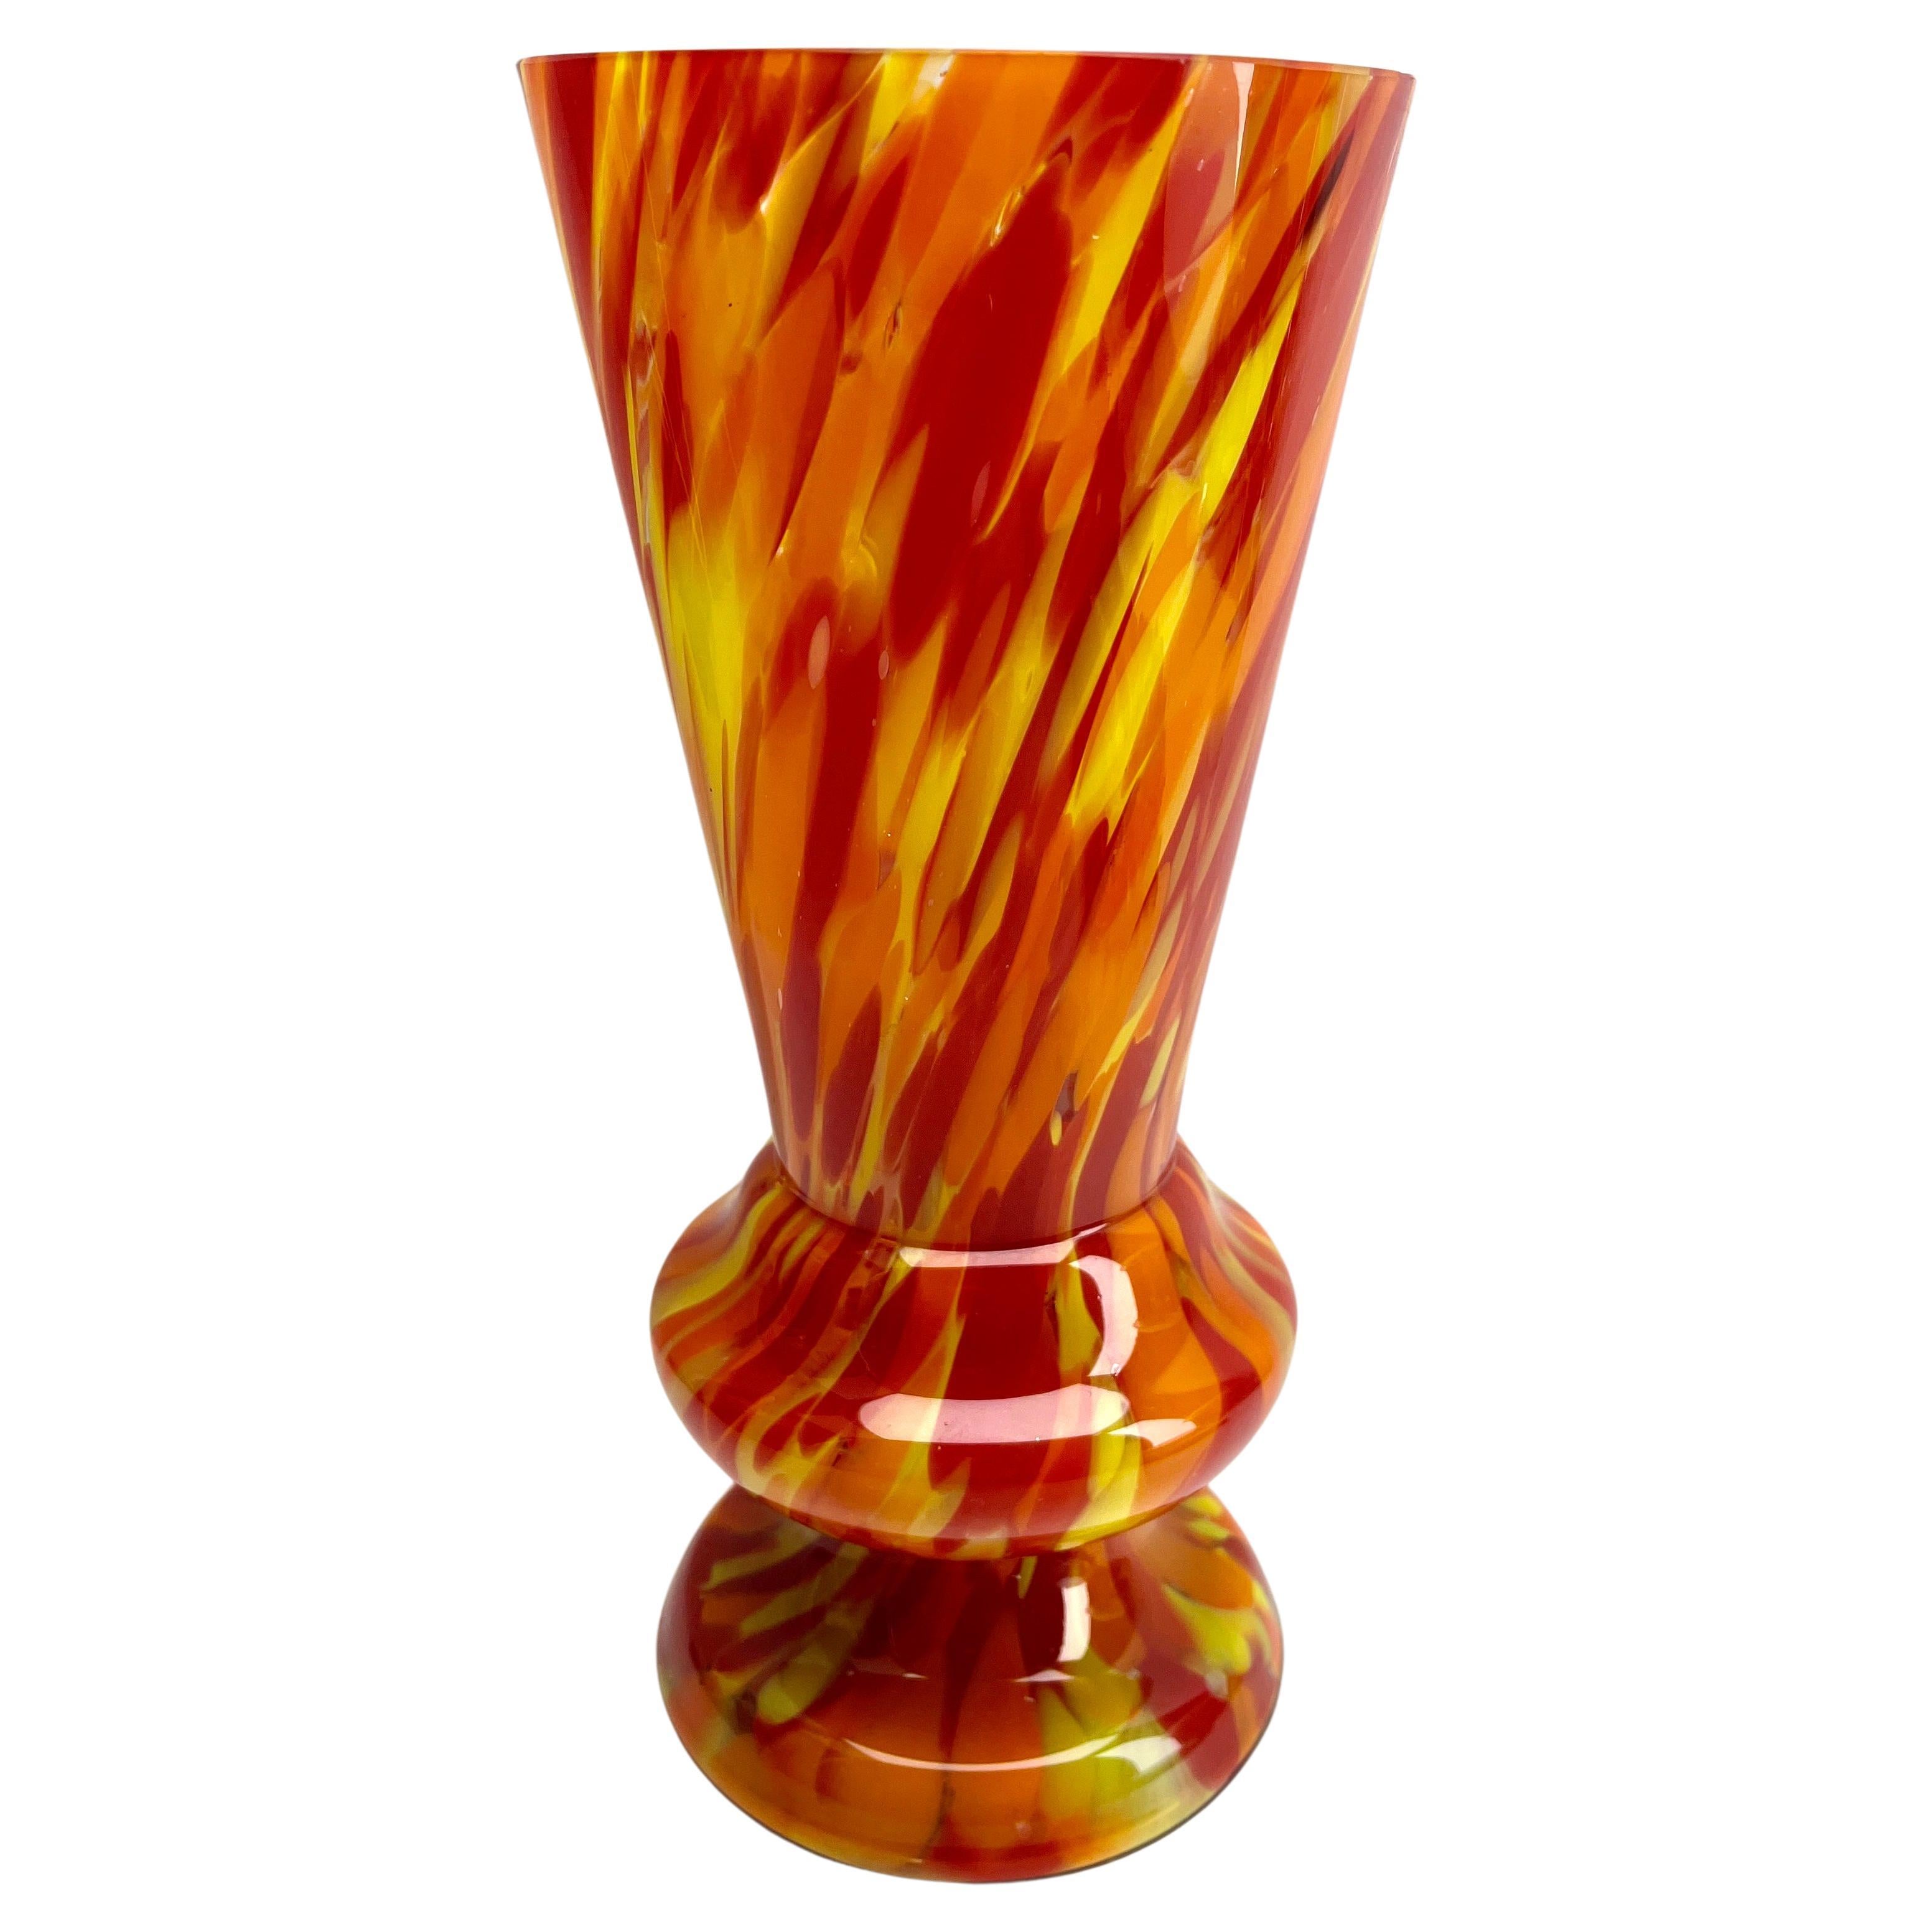 Scailmont - Art Deco vase in colorful multiple layered glass

Documentation can be found in the book of Les Verreries de Scailmont
a l epoque Art Deco. 

These glass pieces made in Belgium during the Art Deco period have some shapes and decors which